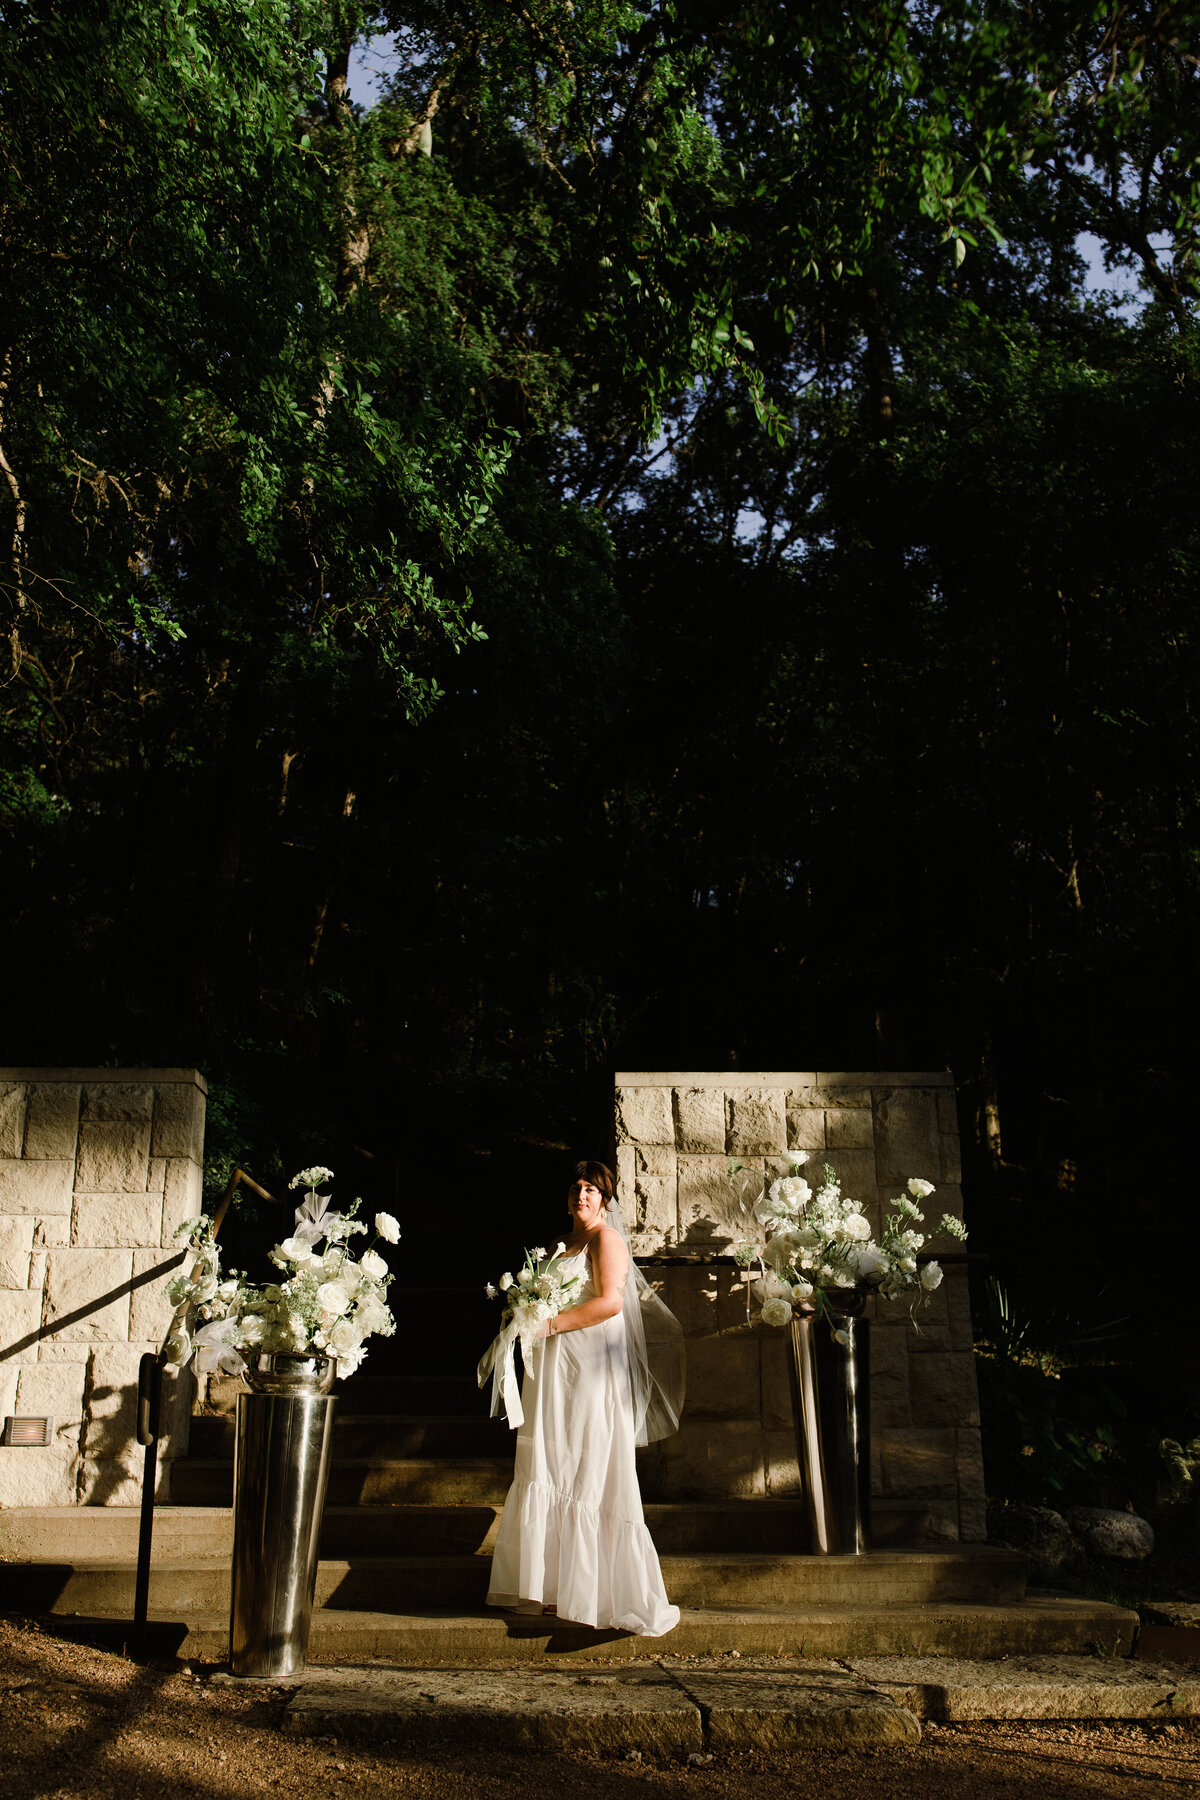 Bride at ceremony site at Couple portraits in the grounds of Umlauf Sculpture Garden, Austin